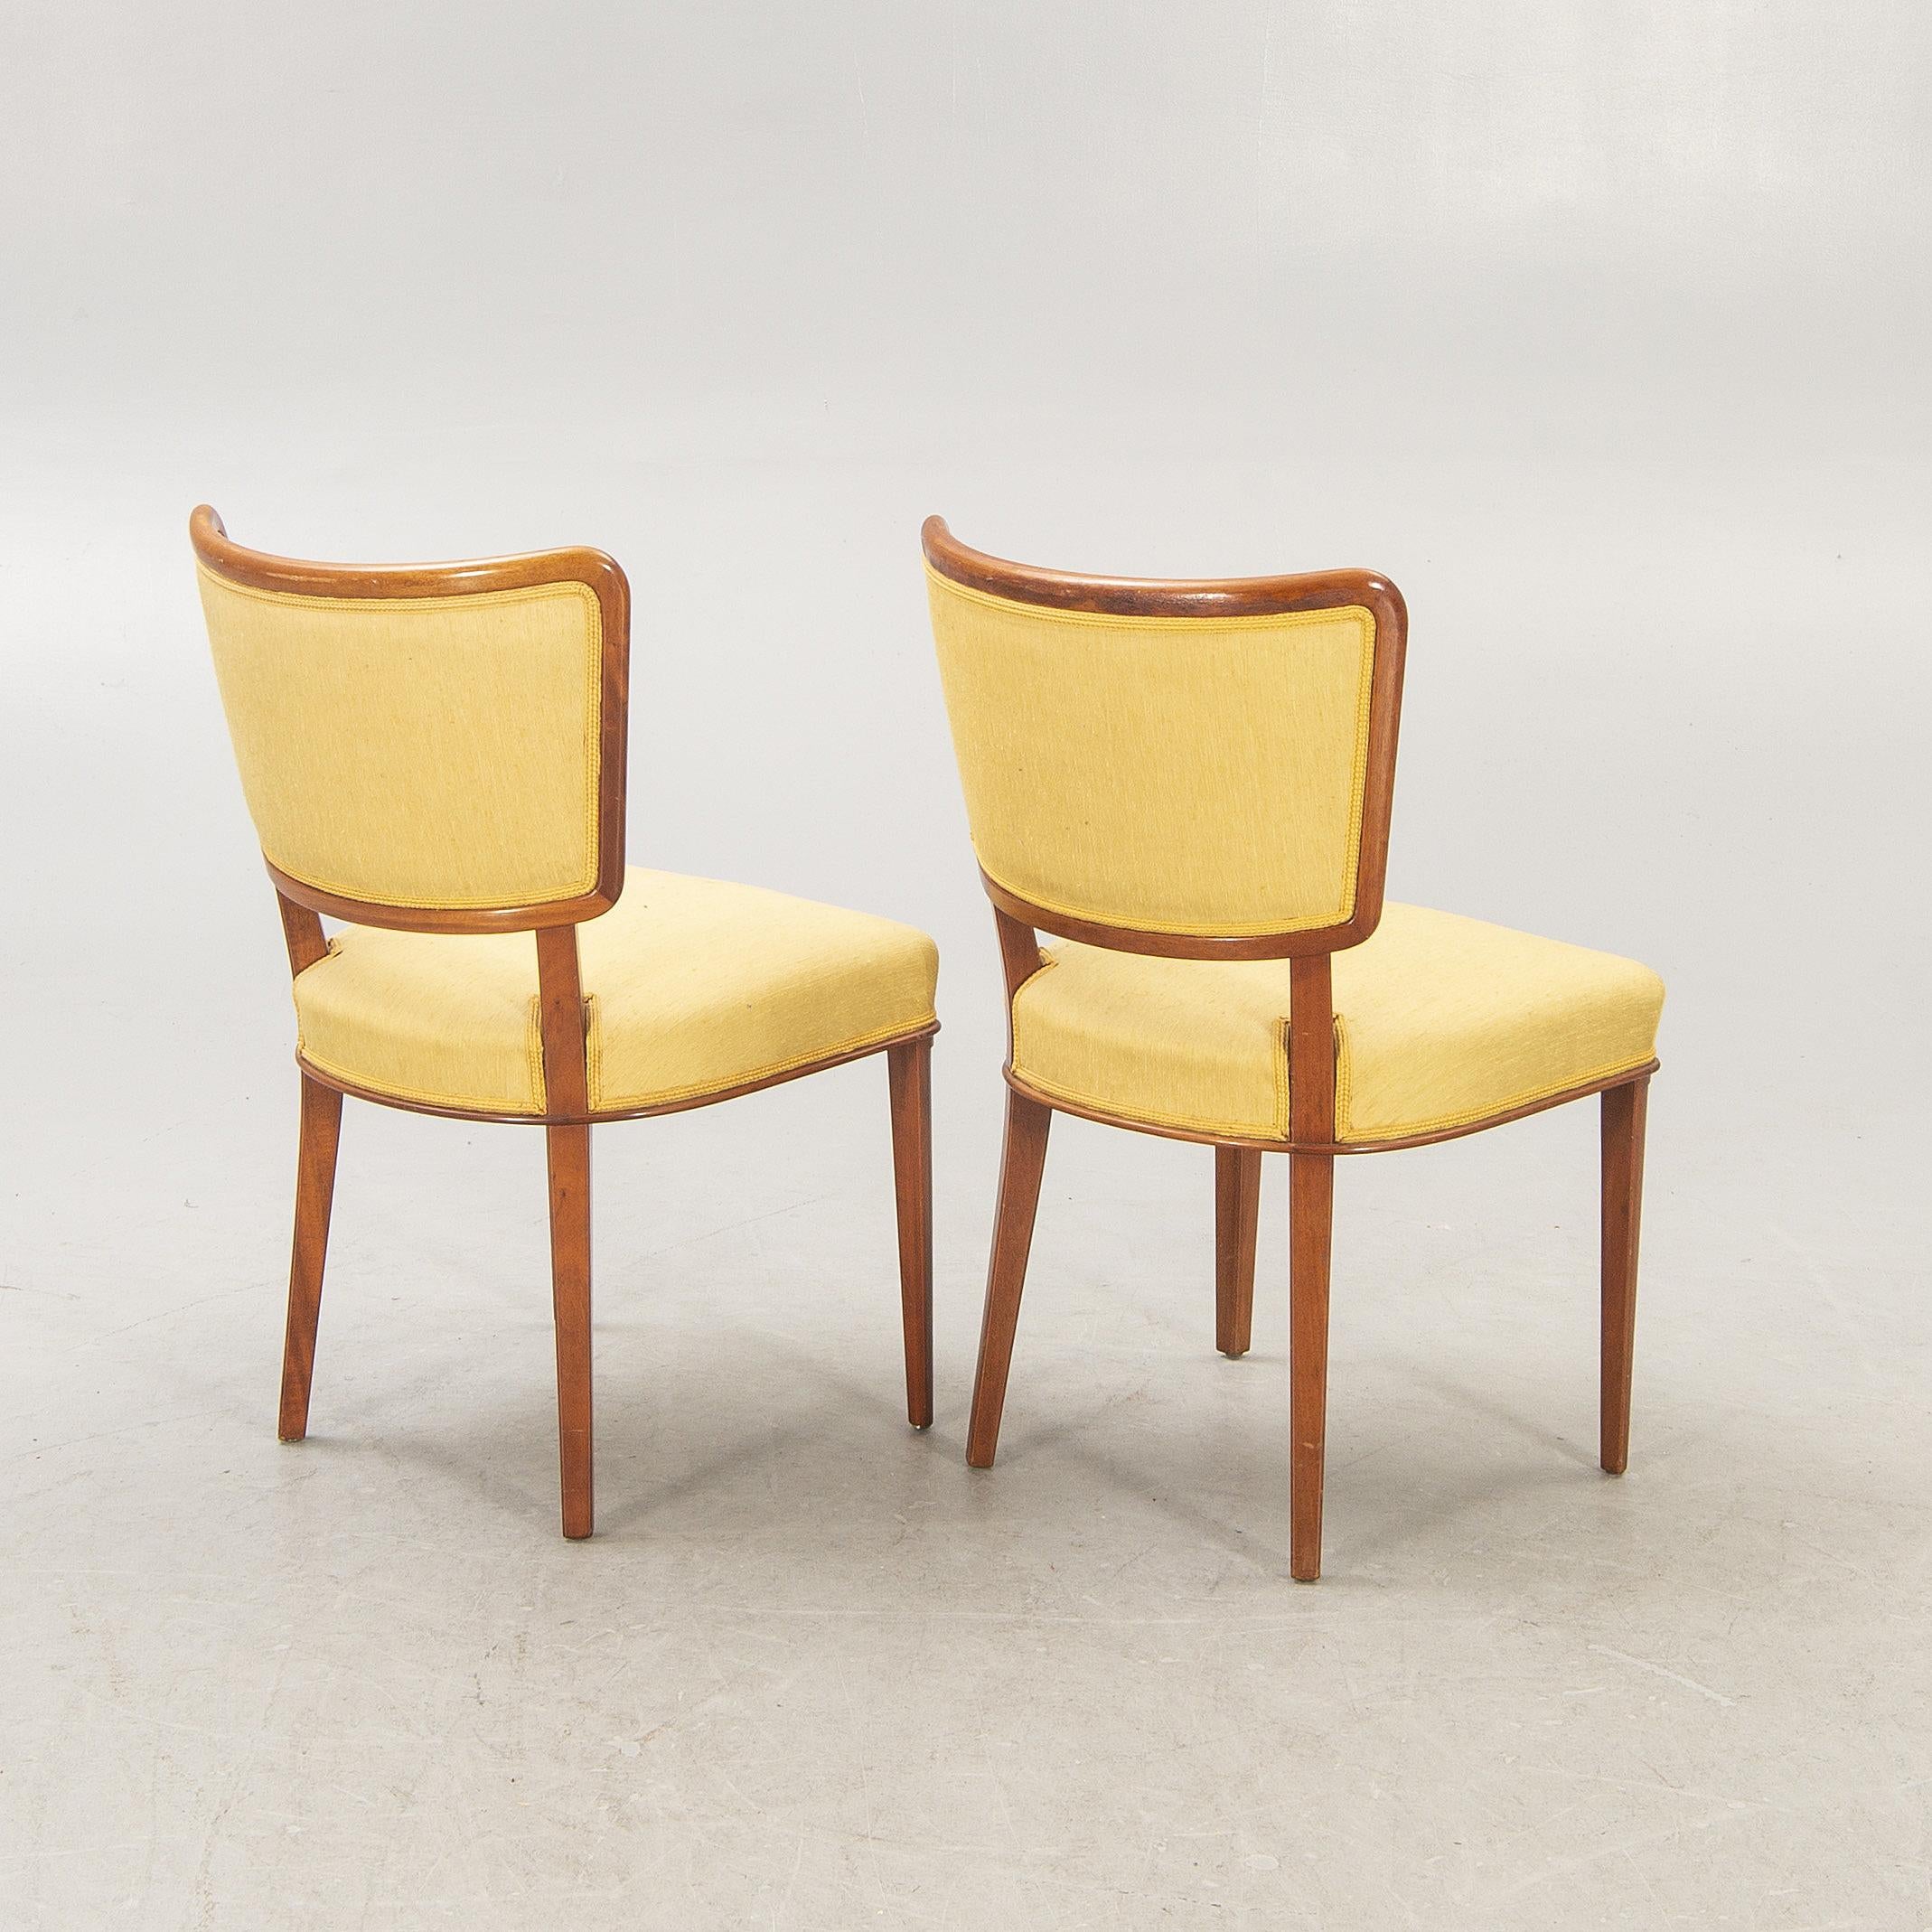 Scandinavian Modern For Claire - Set of Four Swedish Modern Dining Chairs reupholstered in COM.